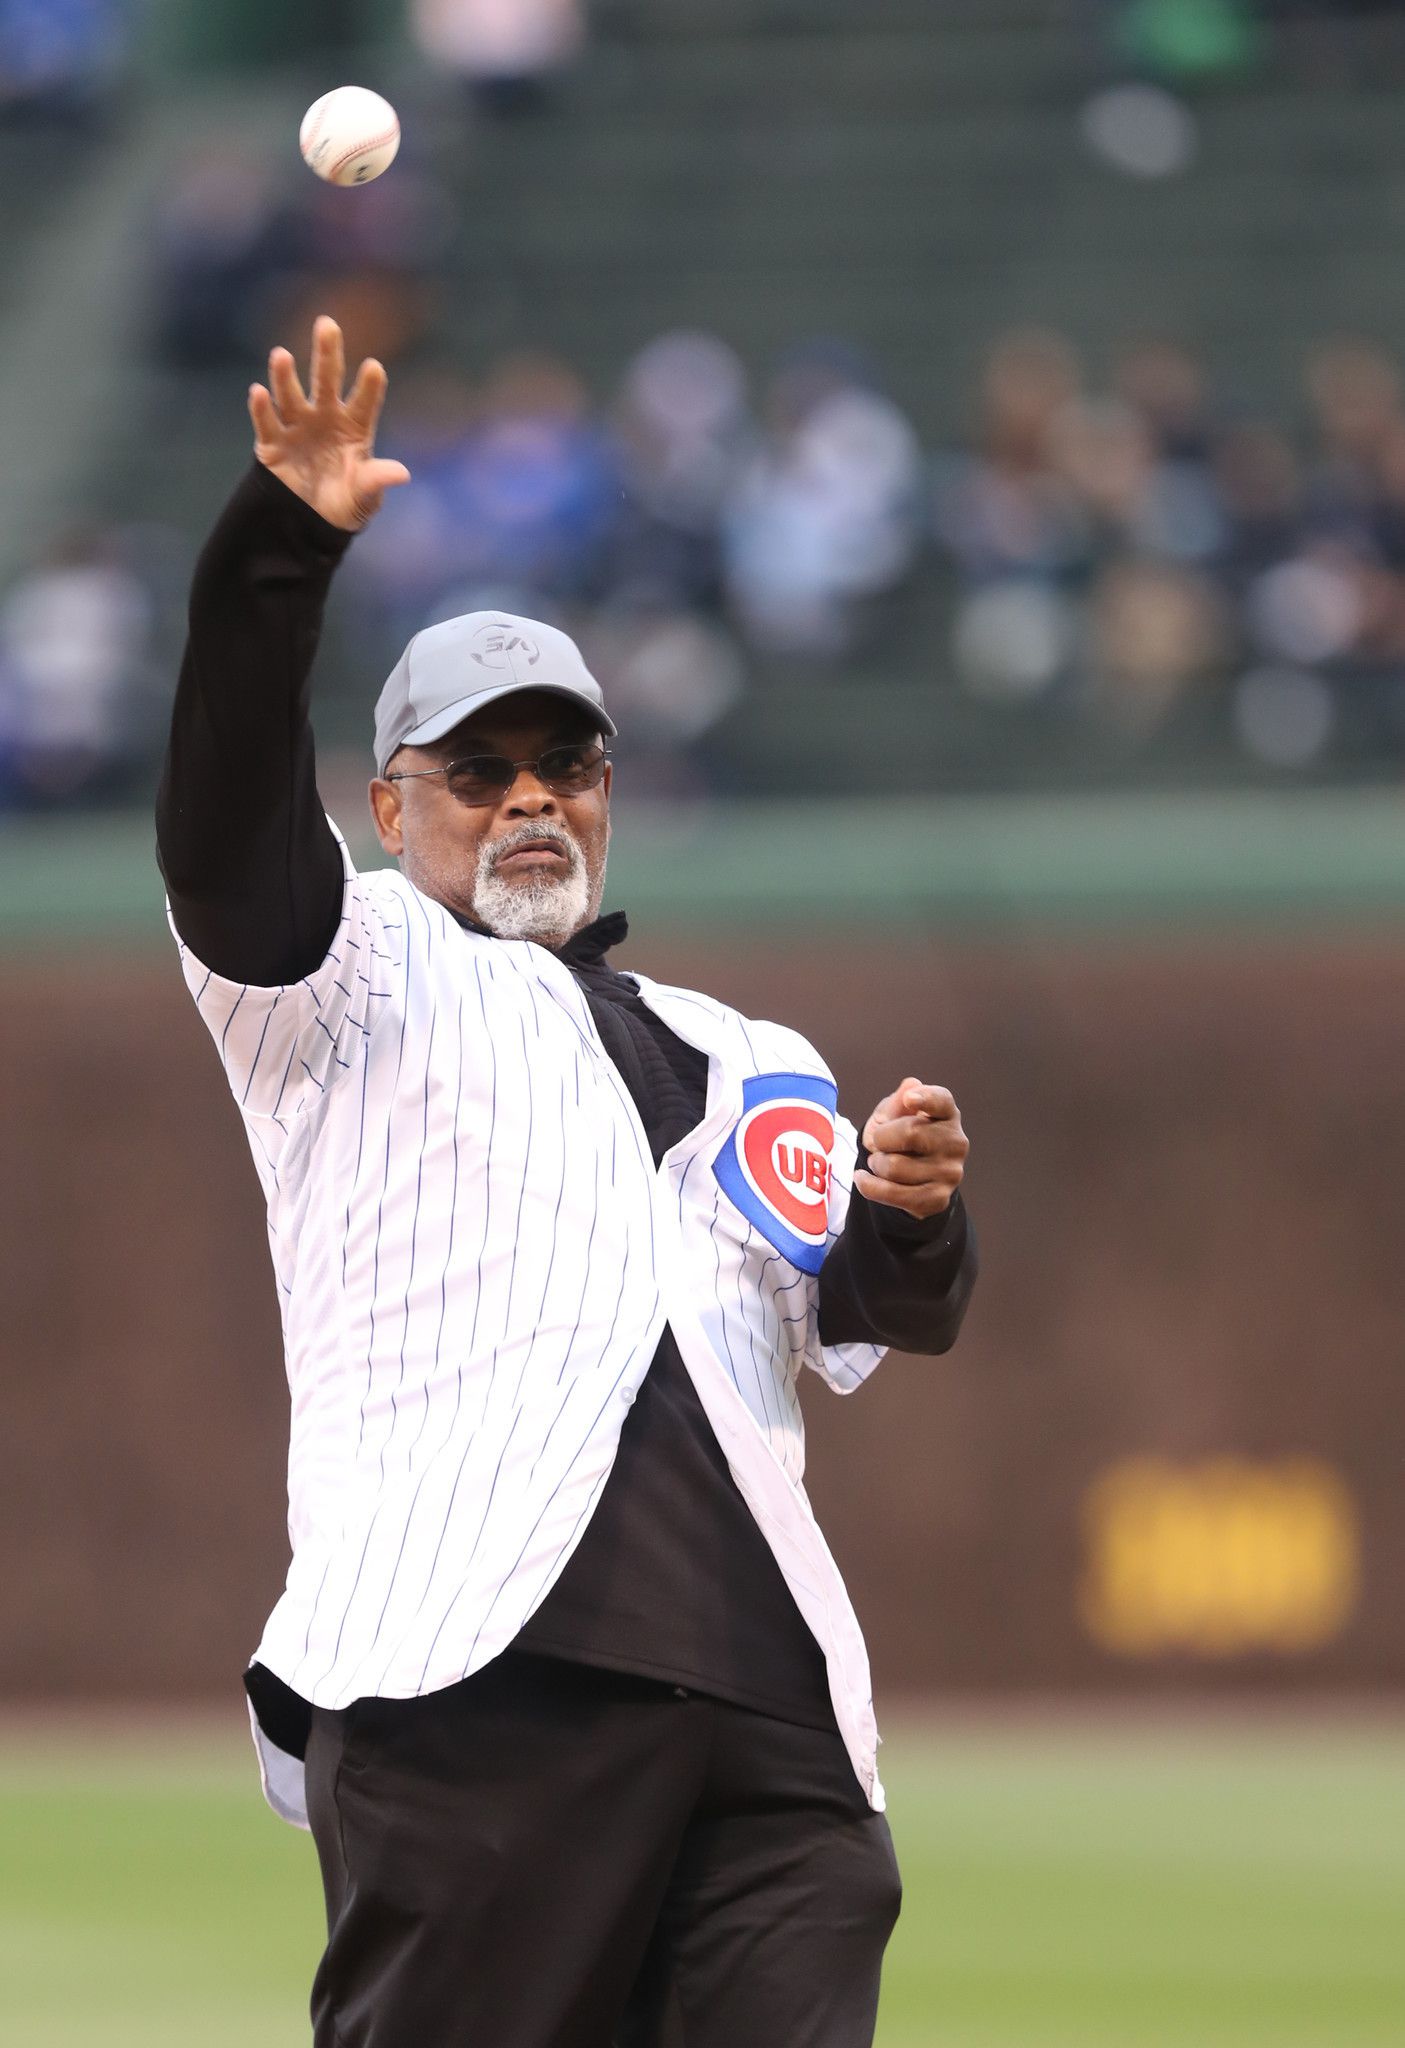 Celebrities at Cubs games – Sun Sentinel